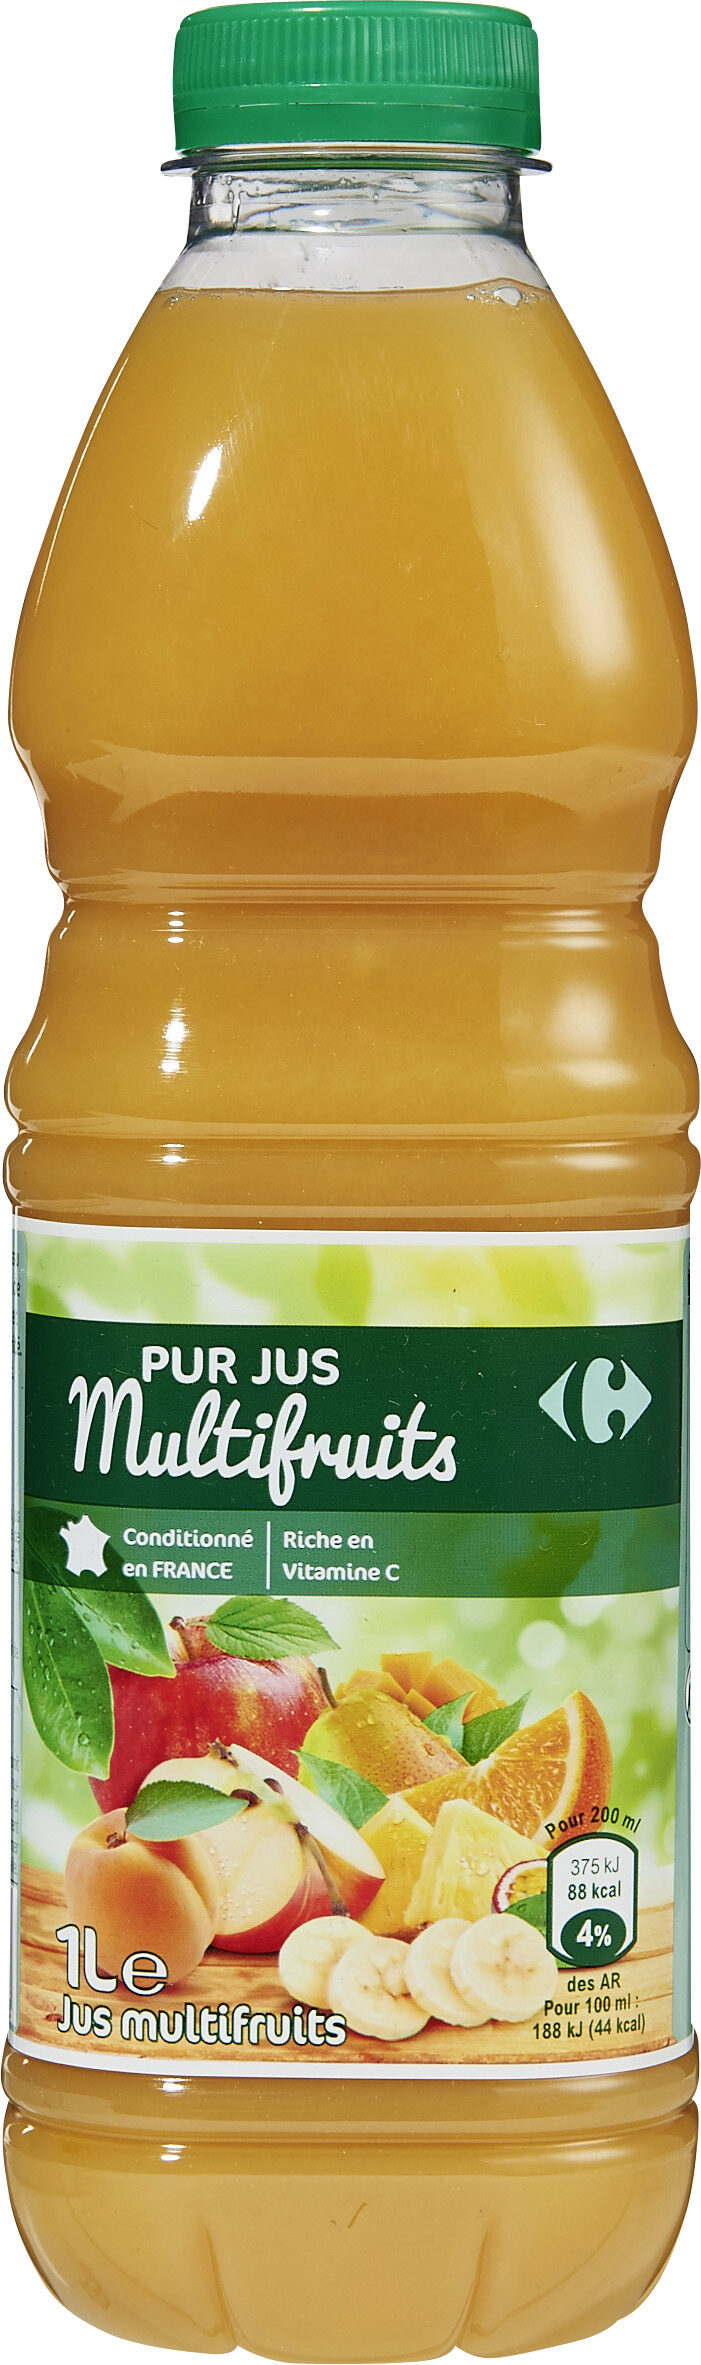 100% pur jus jus multifruits - Producto - fr